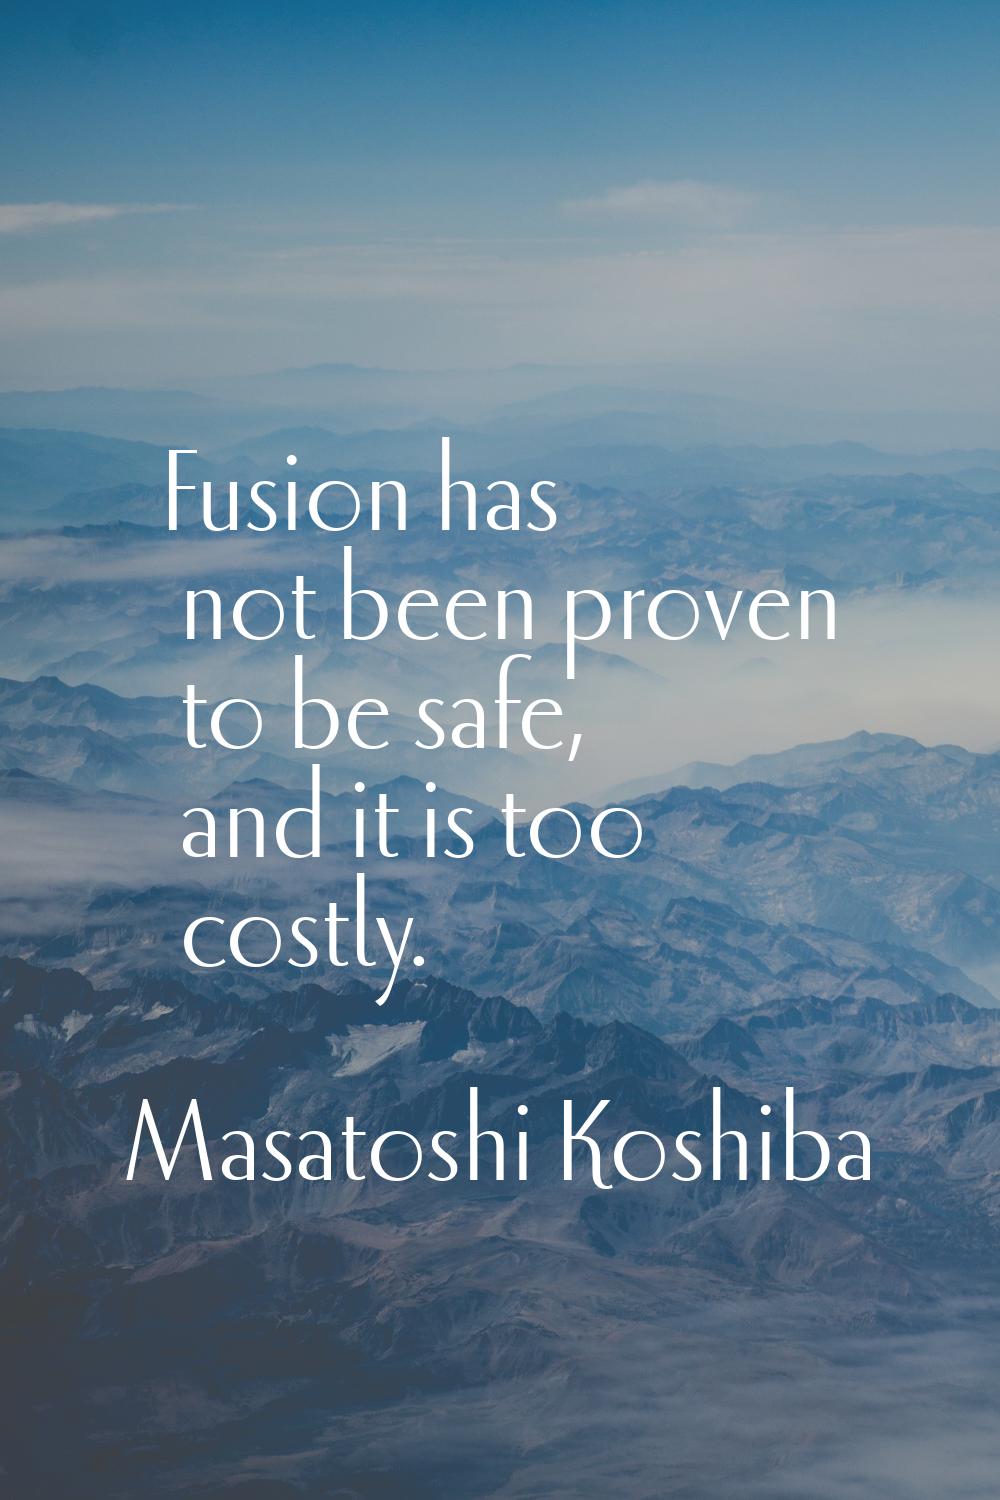 Fusion has not been proven to be safe, and it is too costly.